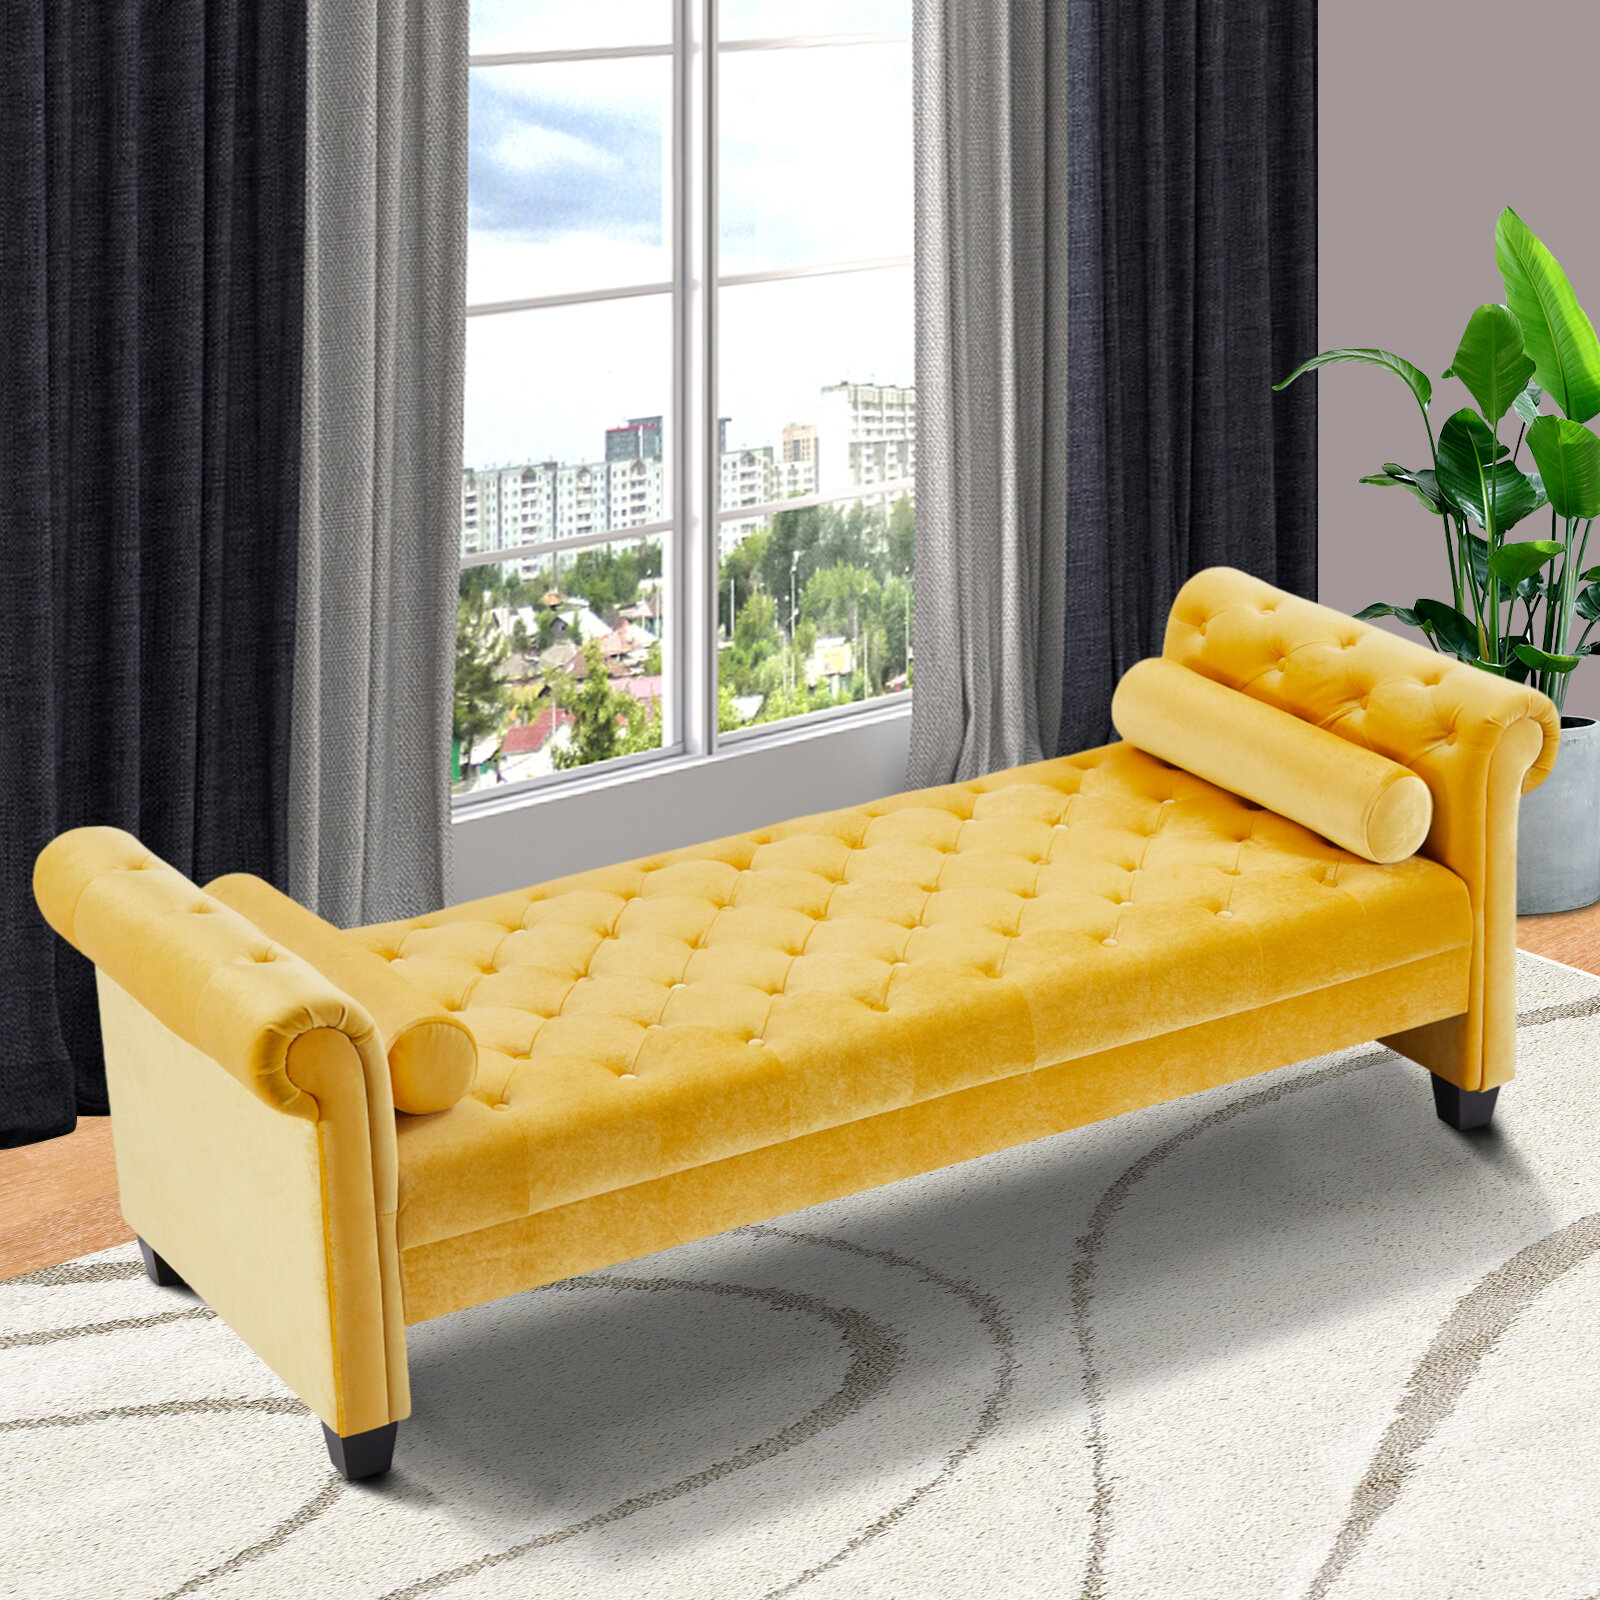 Pasko Upholstered Chaise Lounge